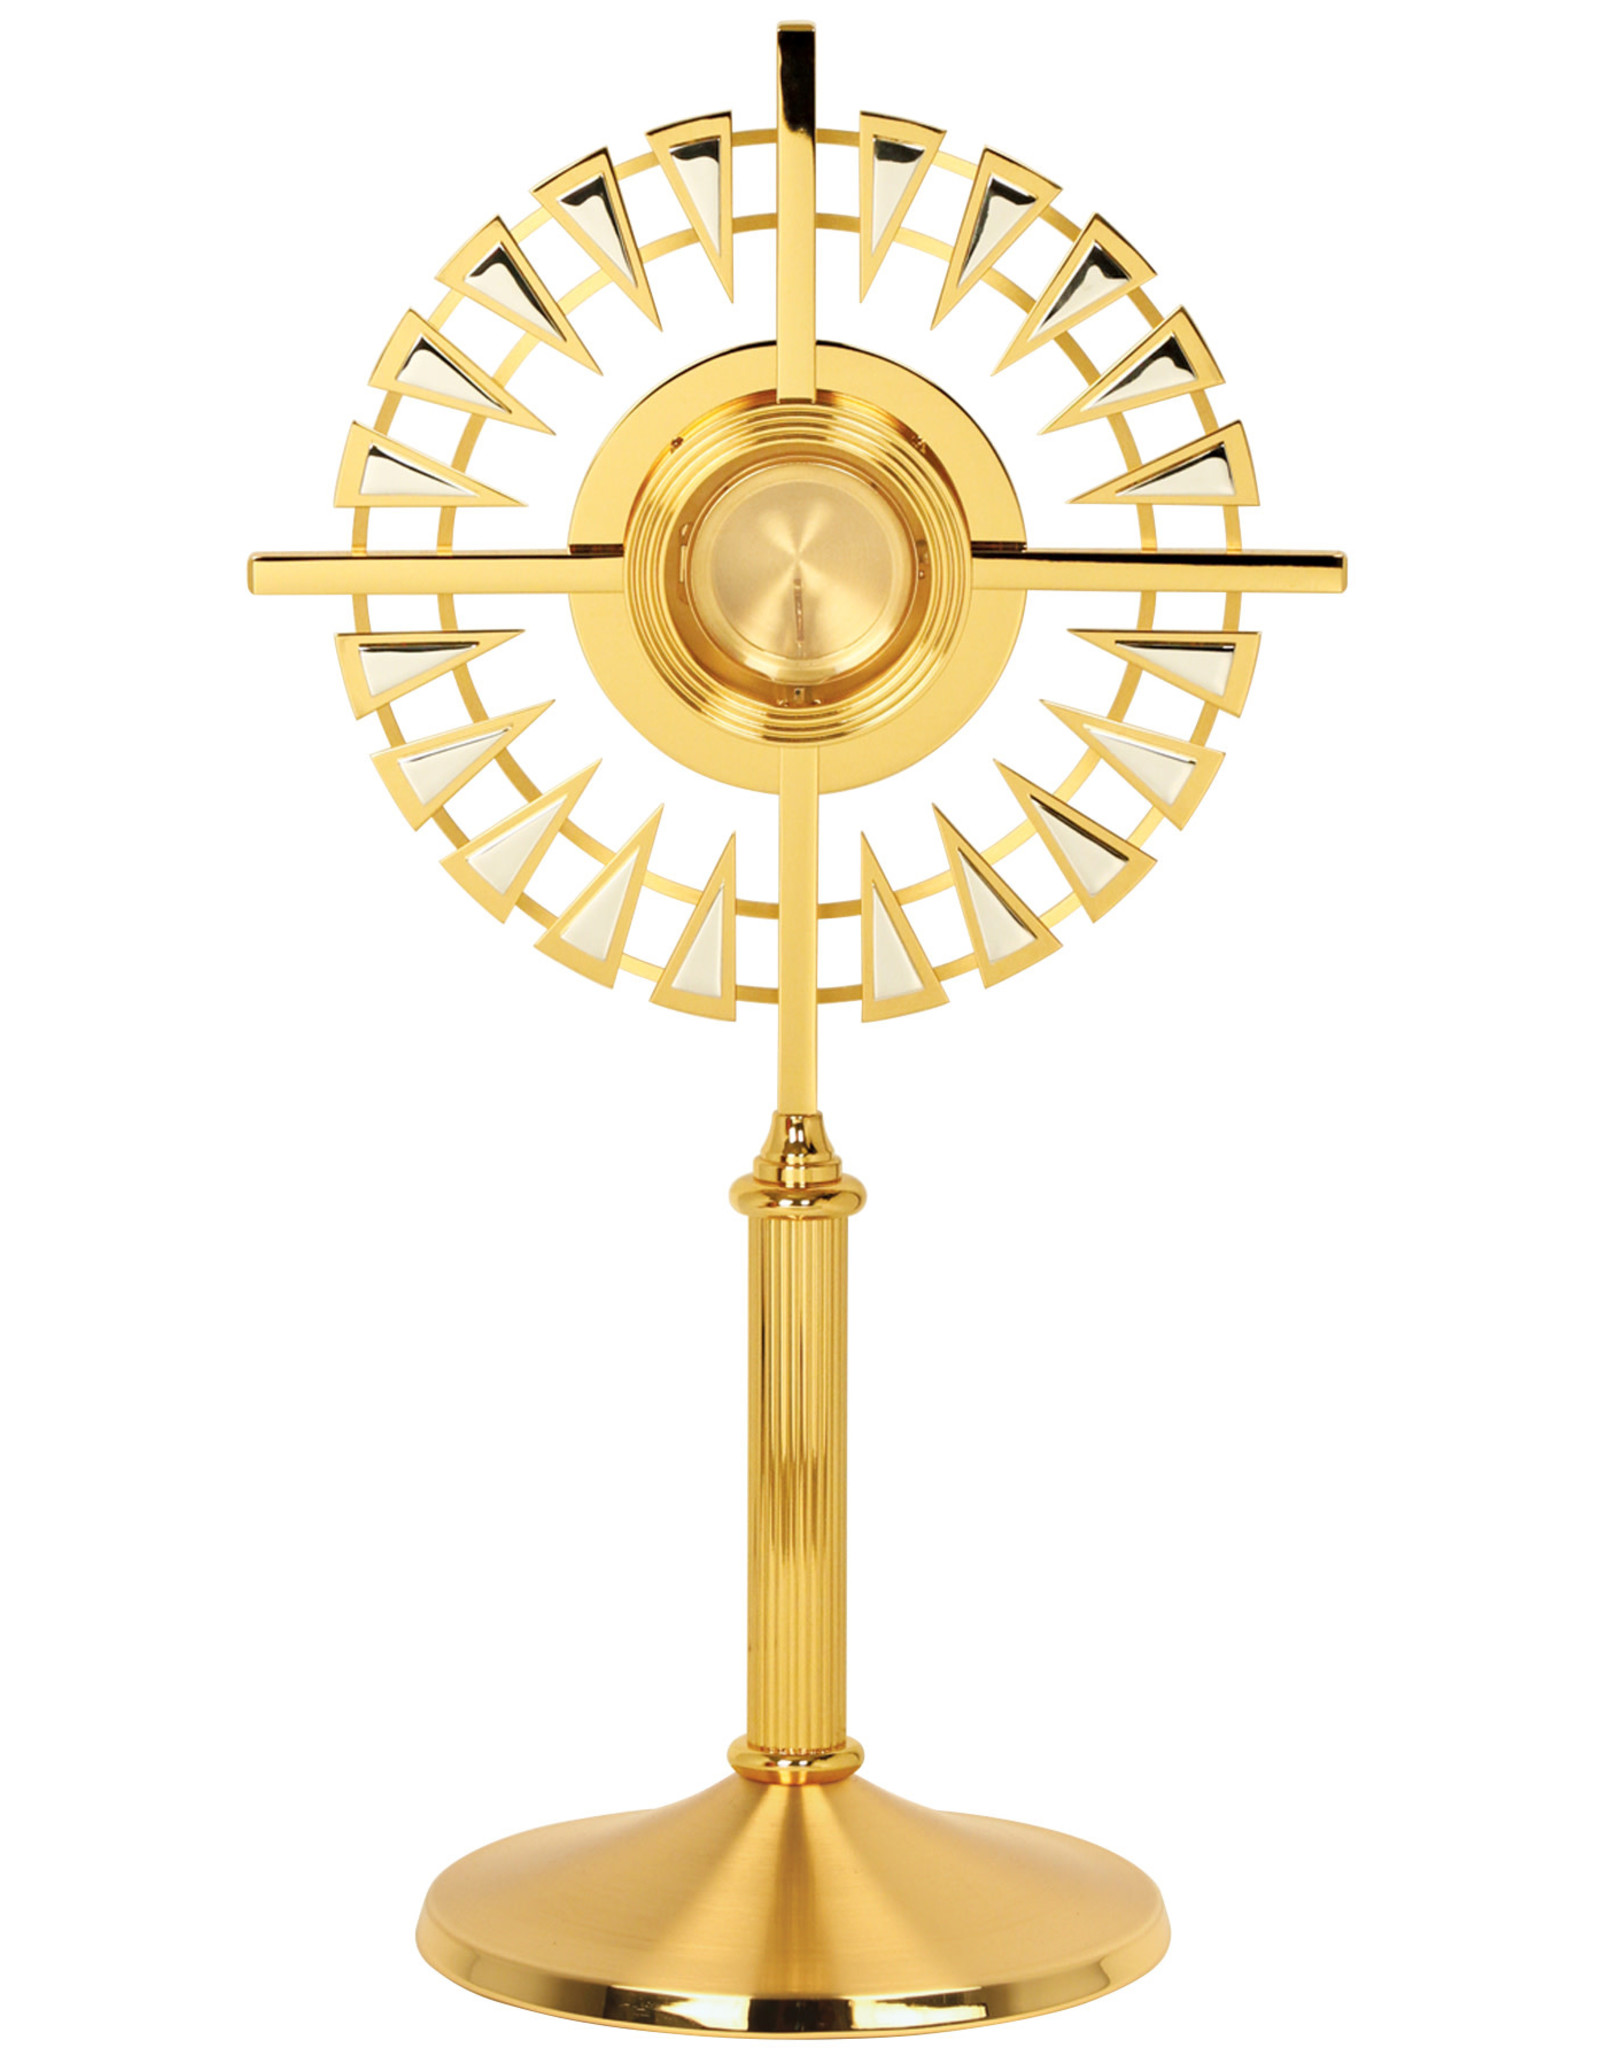 Koleys Monstrance - Gold Plated with Bright Silver Accents - Acrylic Glass Enclosed Luna